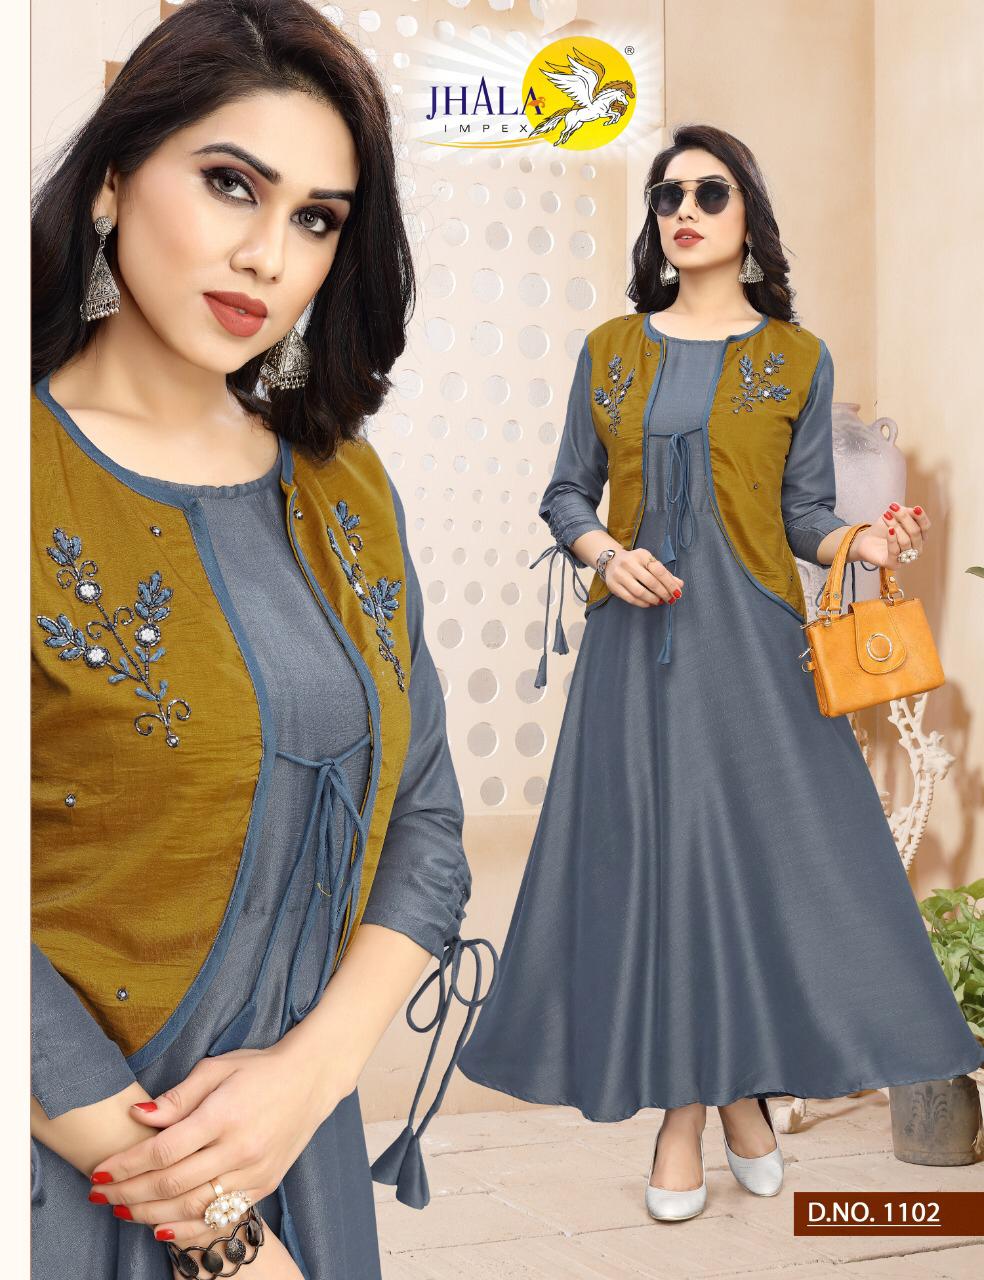 Jhala Impex Cotty Vol 2 Long Flaired koti Style Kurti Catalog Supplier in  Surat